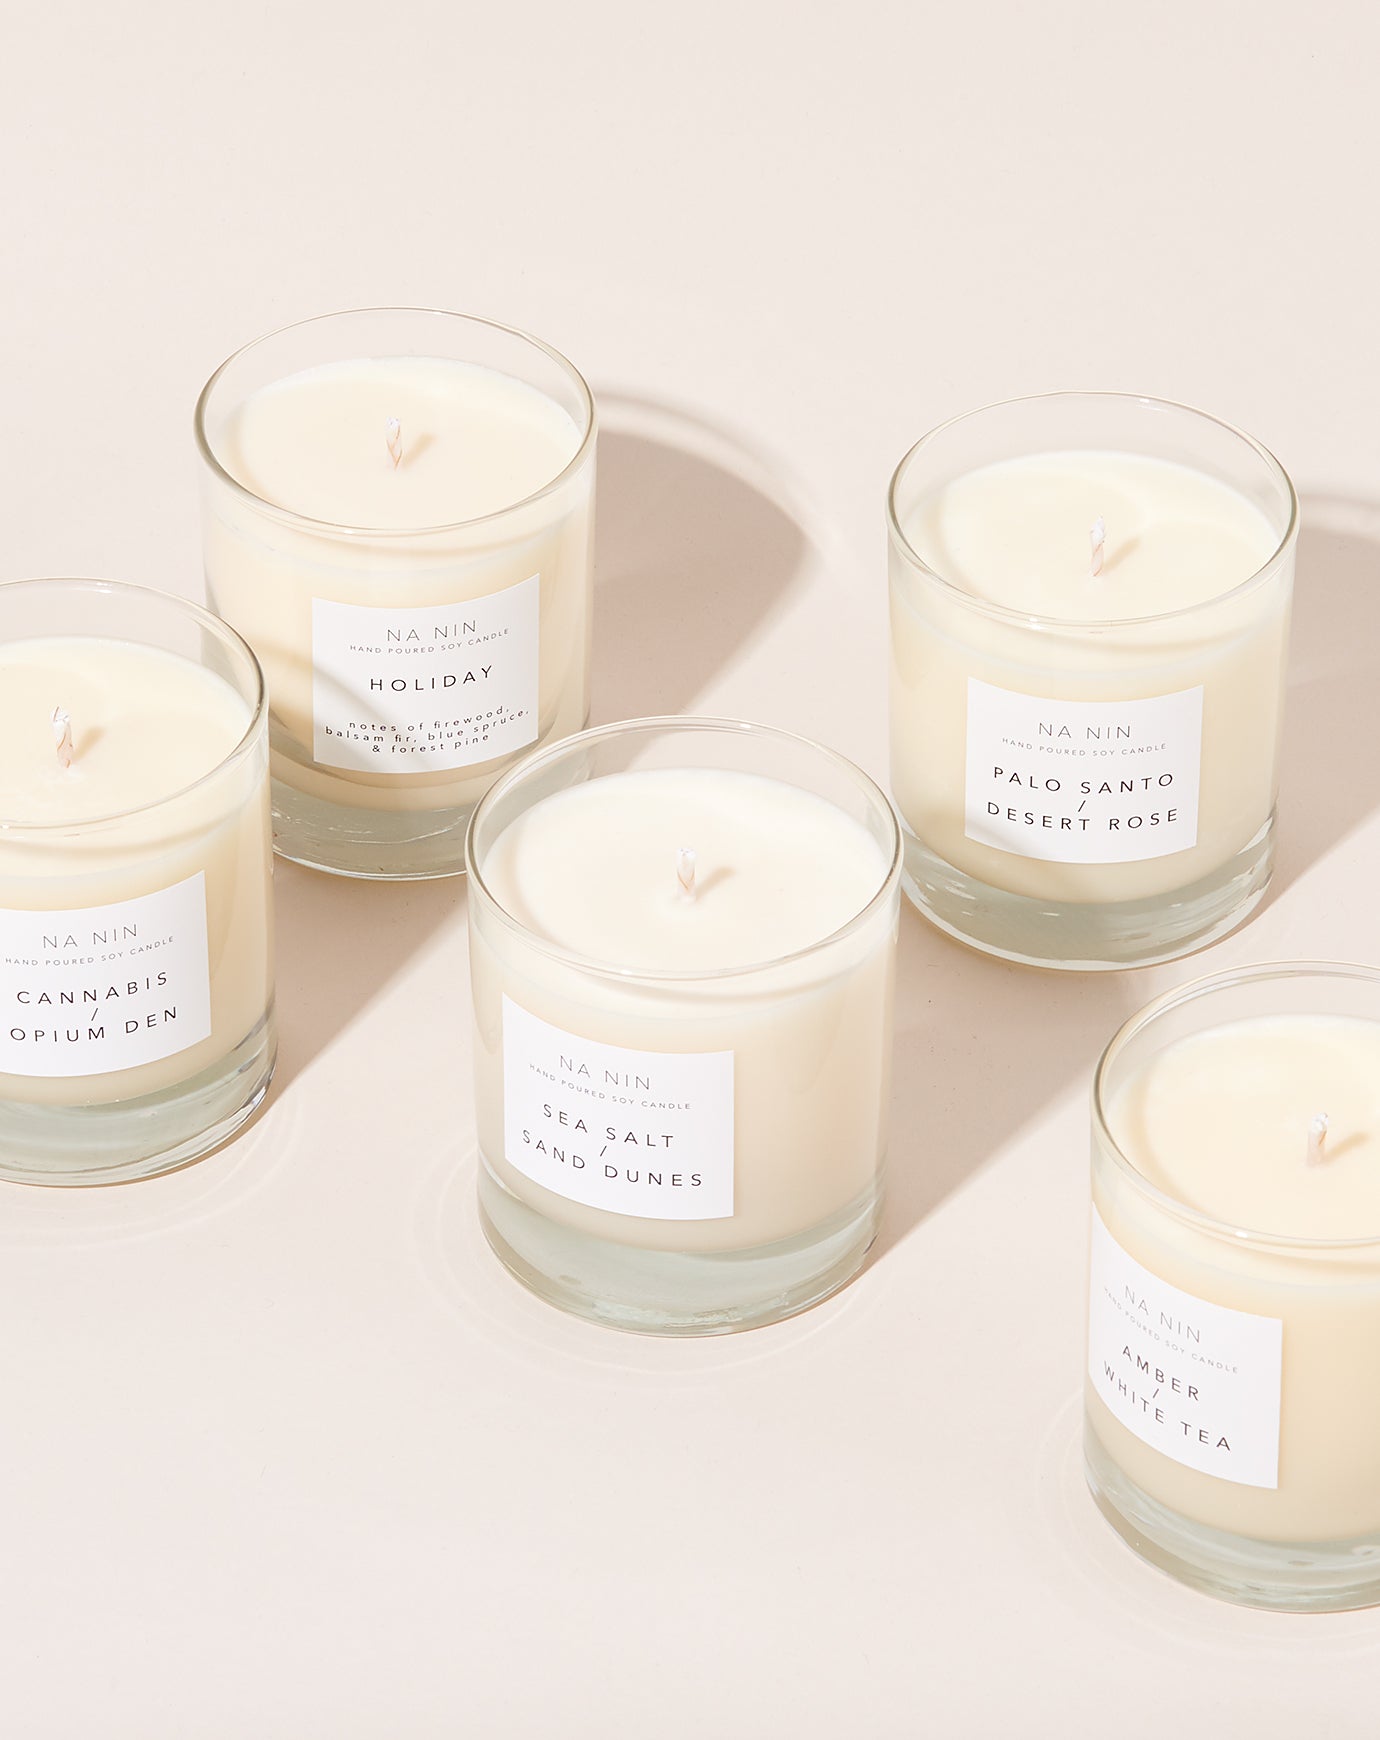 Na Nin Pairings Collection Candle in Palo Santo / Desert Rose